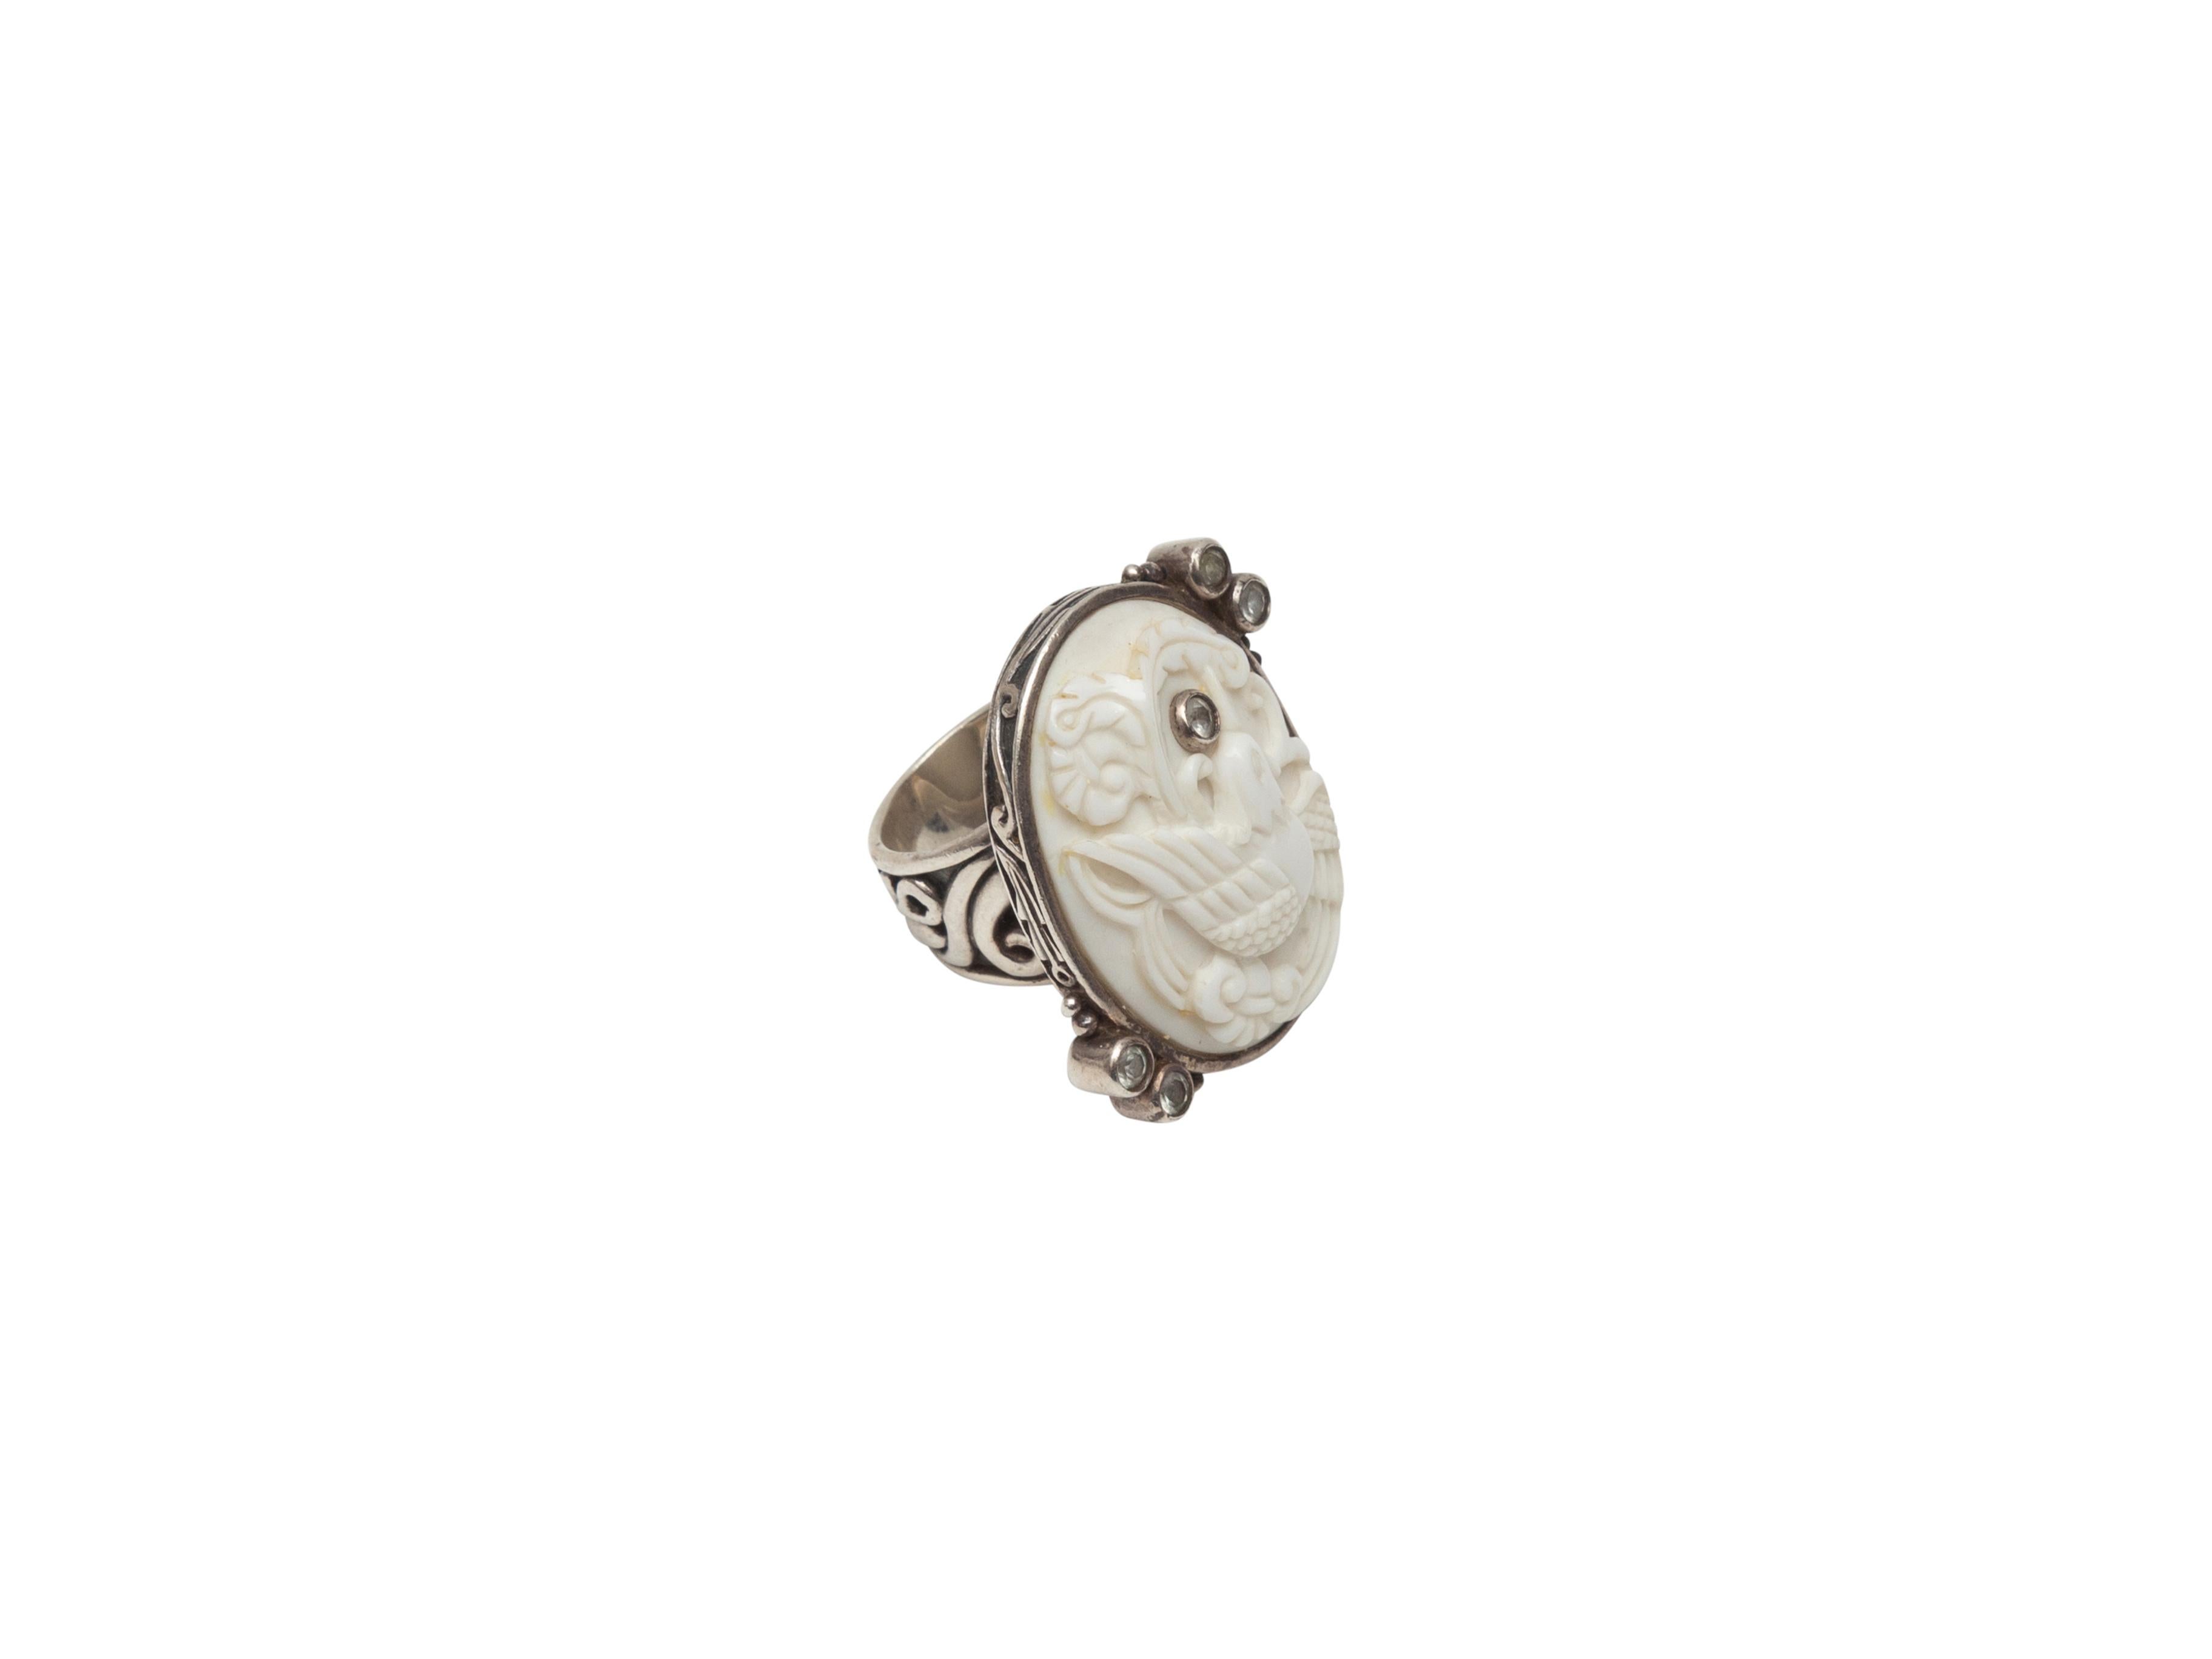 Product details: White and sterling silver carved bird ring by Echo of the Dreamer. Crystal adornments at top and sides. 1.5